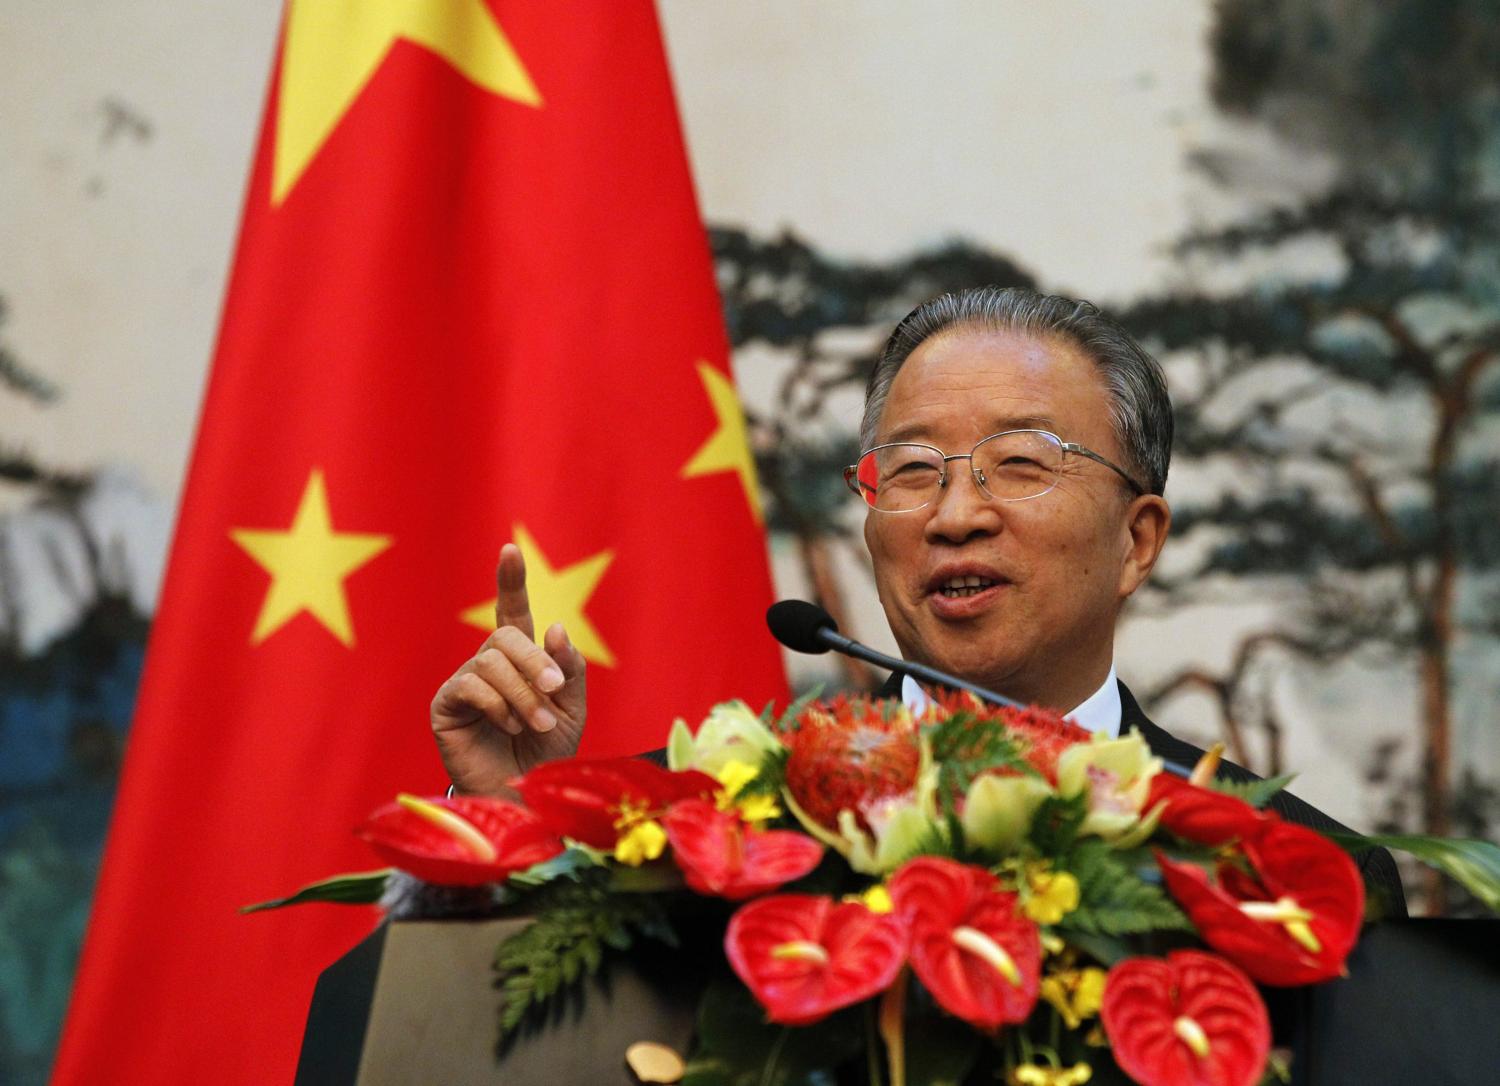 Chinese State Councillor Dai Bingguo speaks during a news briefing with European Union (EU) Foreign Policy Chief Catherine Ashton (not pictured) at the Diaoyutai State Guest House in Beijing, July 10, 2012. REUTERS/Ng Han Guan/Pool (CHINA - Tags: POLITICS) - RTR34SA6